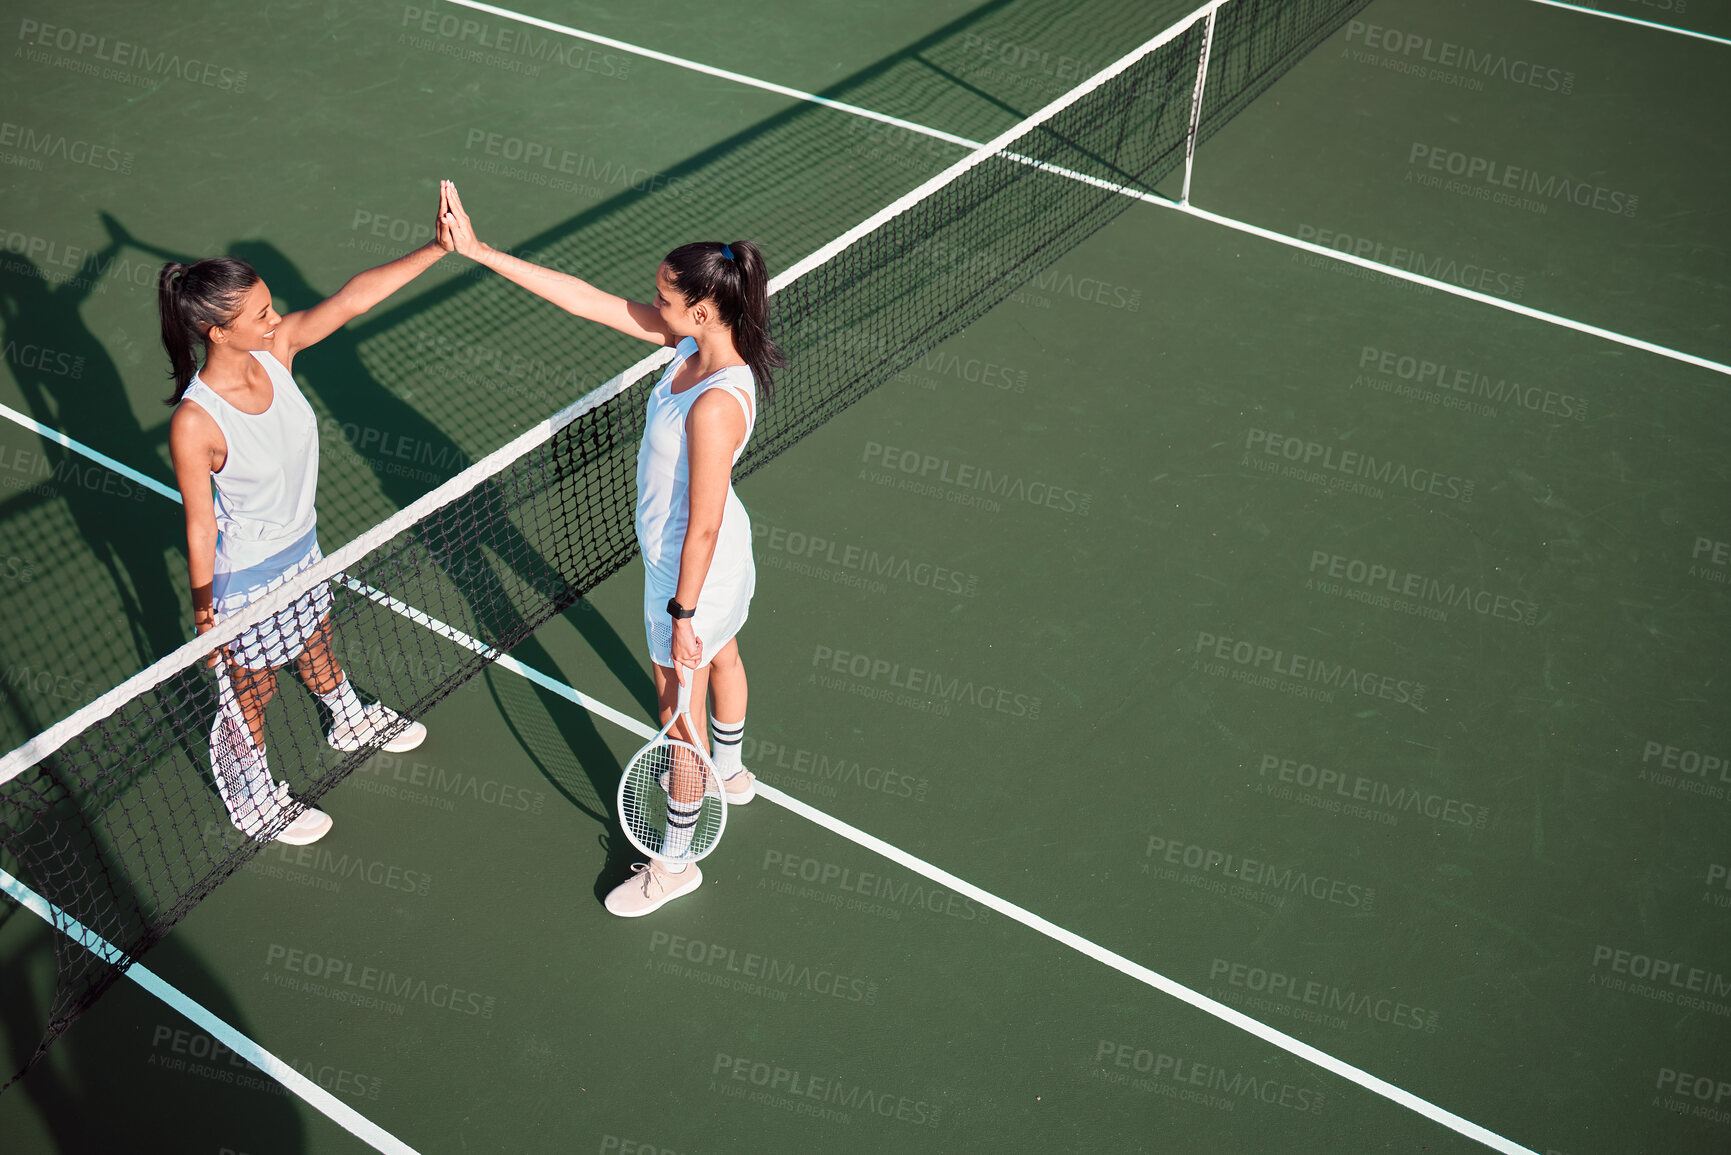 Buy stock photo Shot of two sporty young women giving each other a high five while playing tennis together on a court